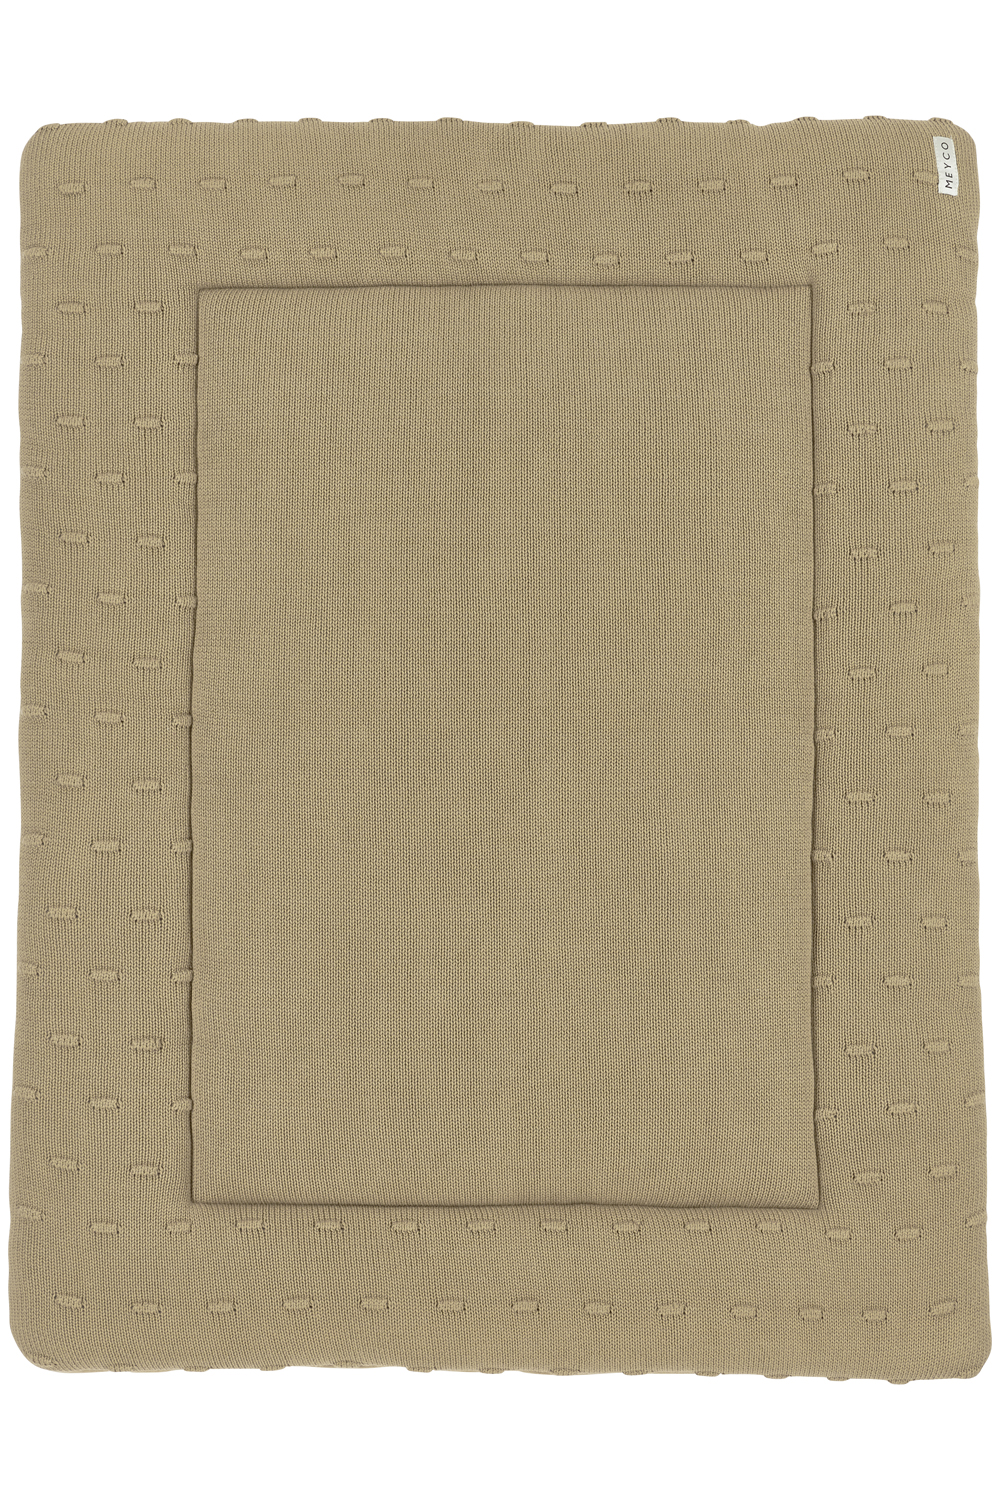 Boxkleed - taupe - 77x97cm